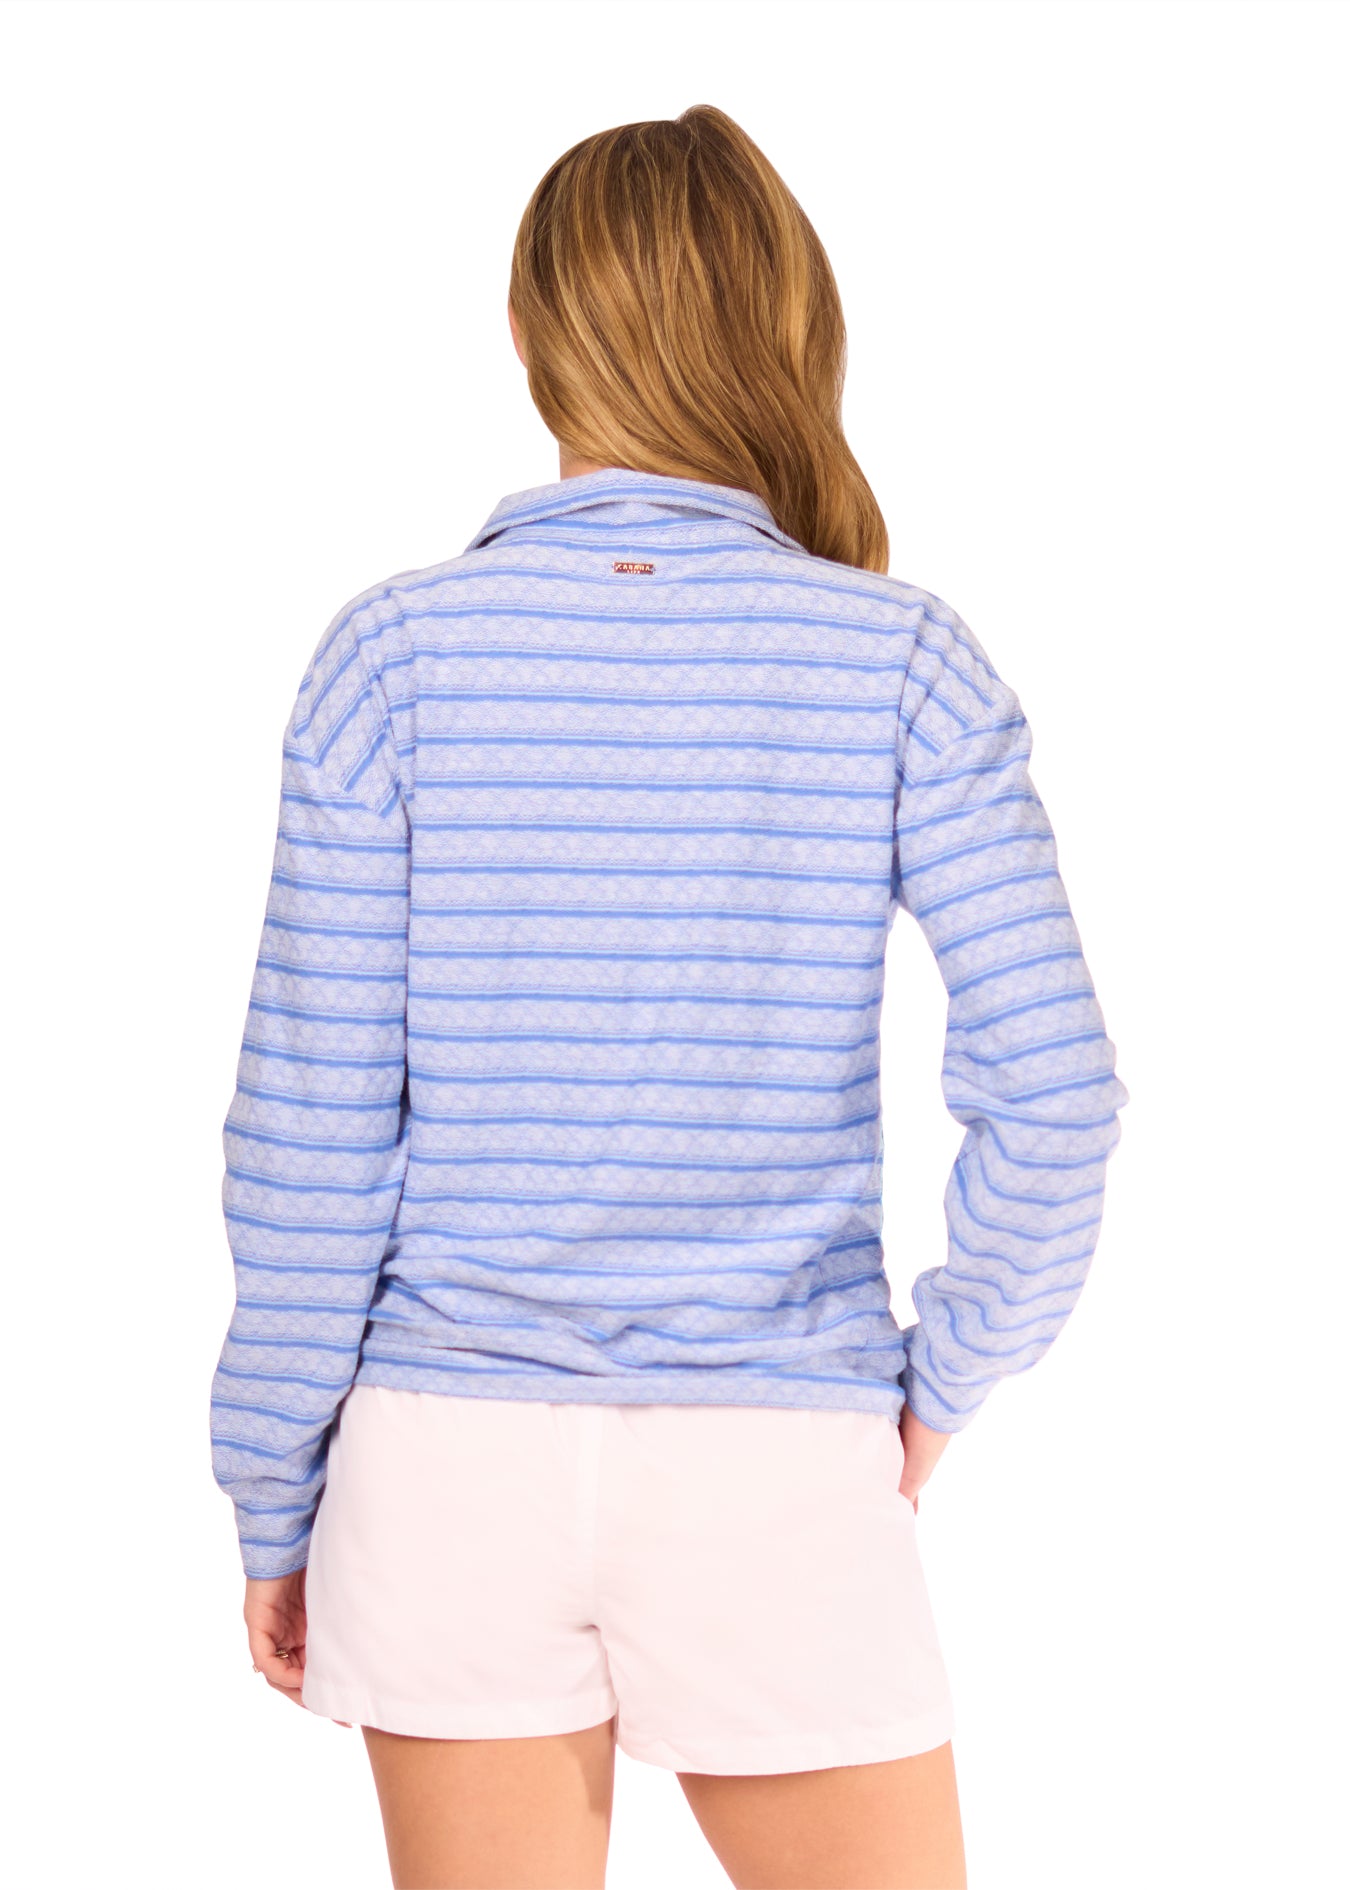 Back of Woman in Blue Half Zip Pullover and White Microfiber Shorts